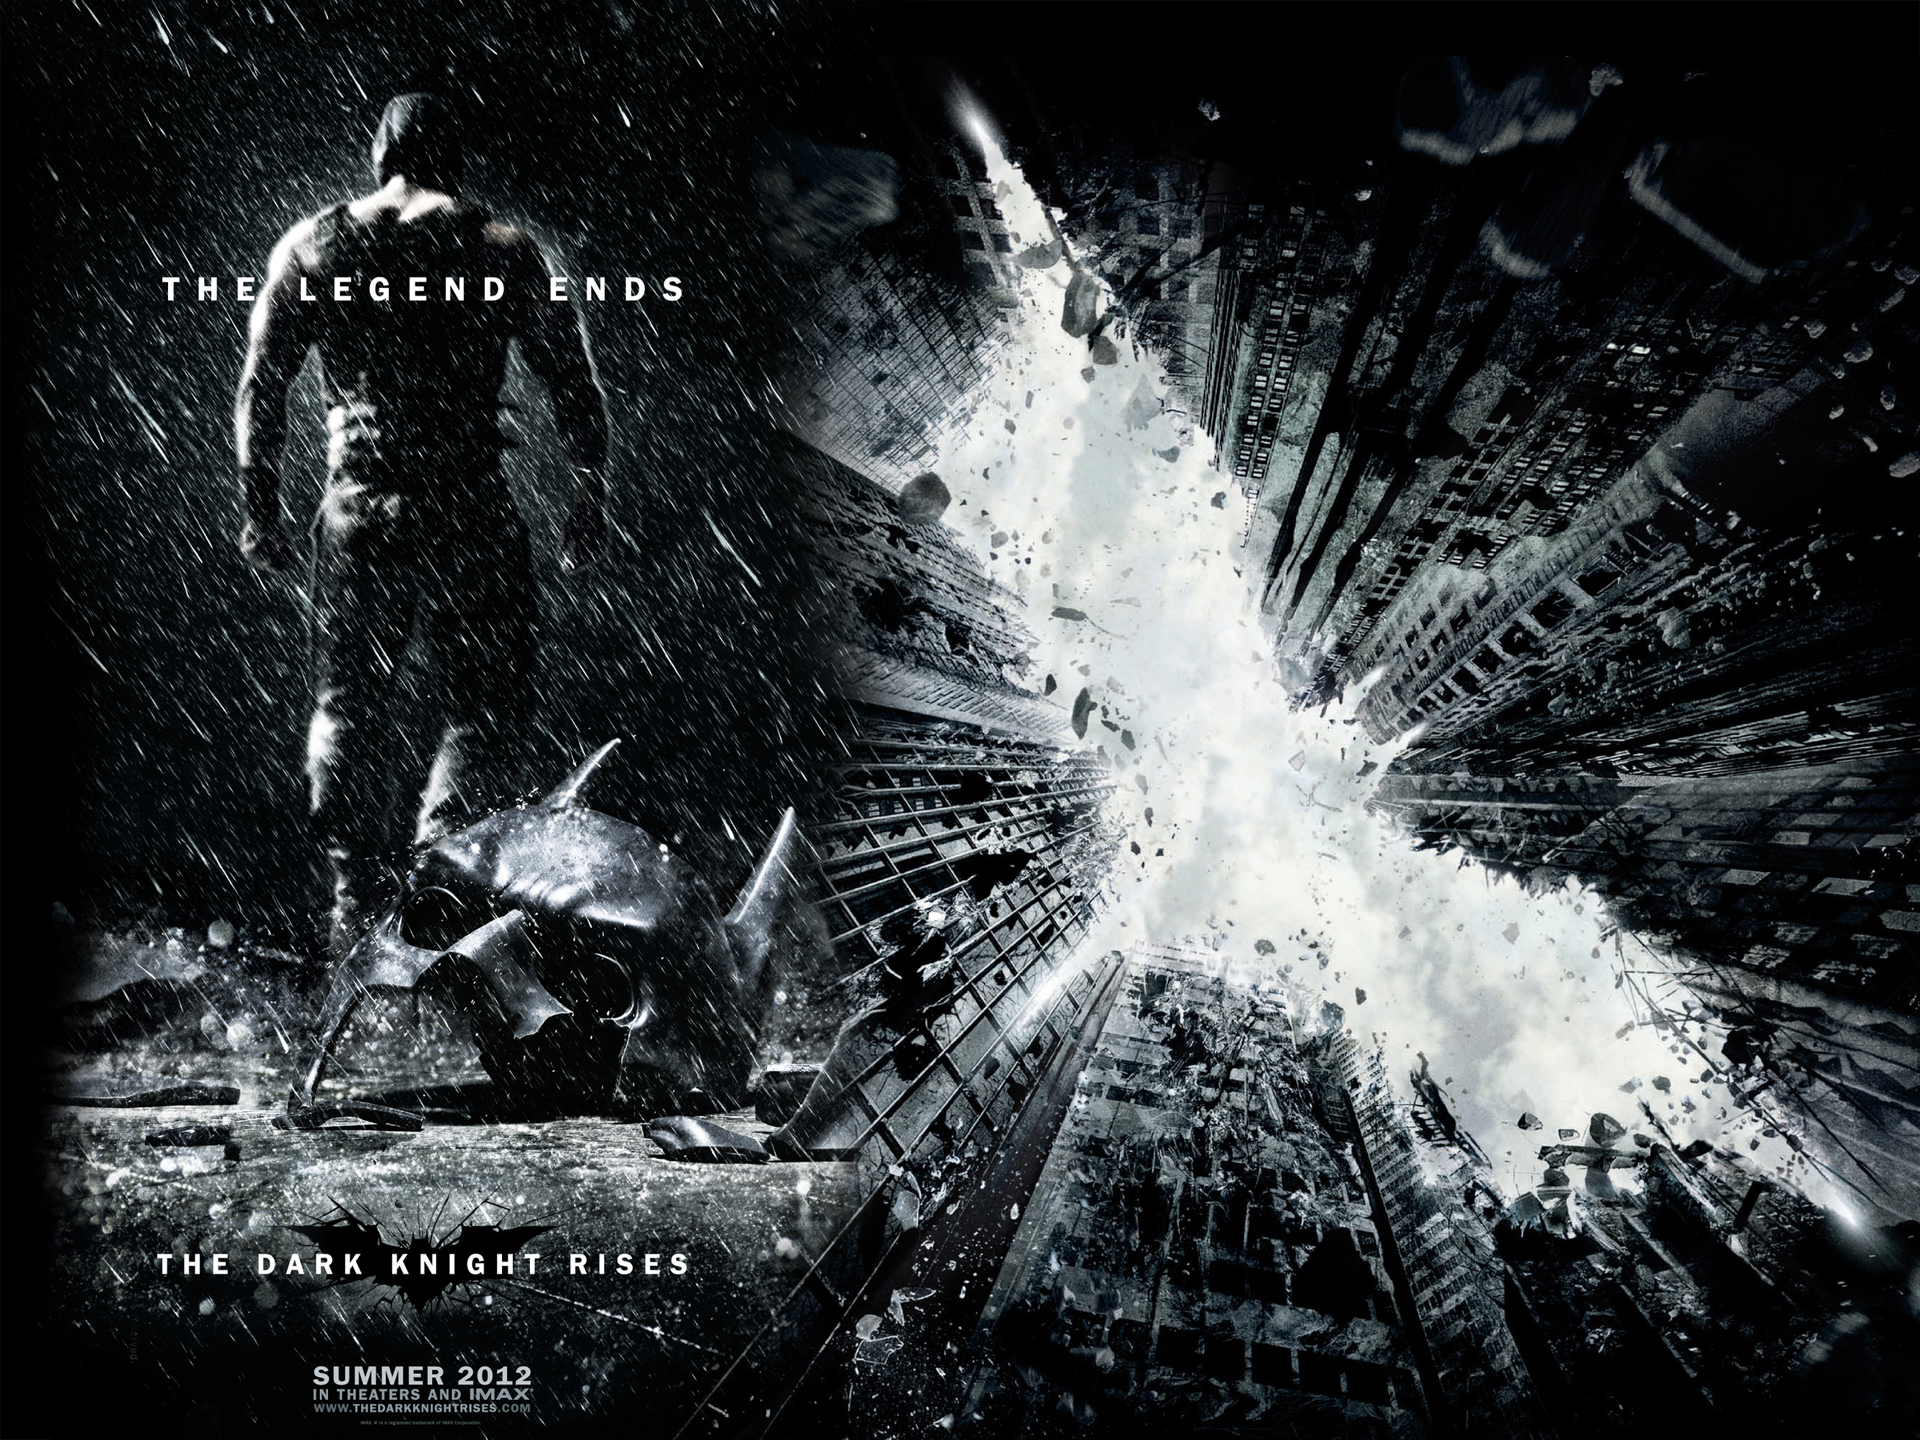 The Dark Knight Rises Two Exclusive wallpapers and the new